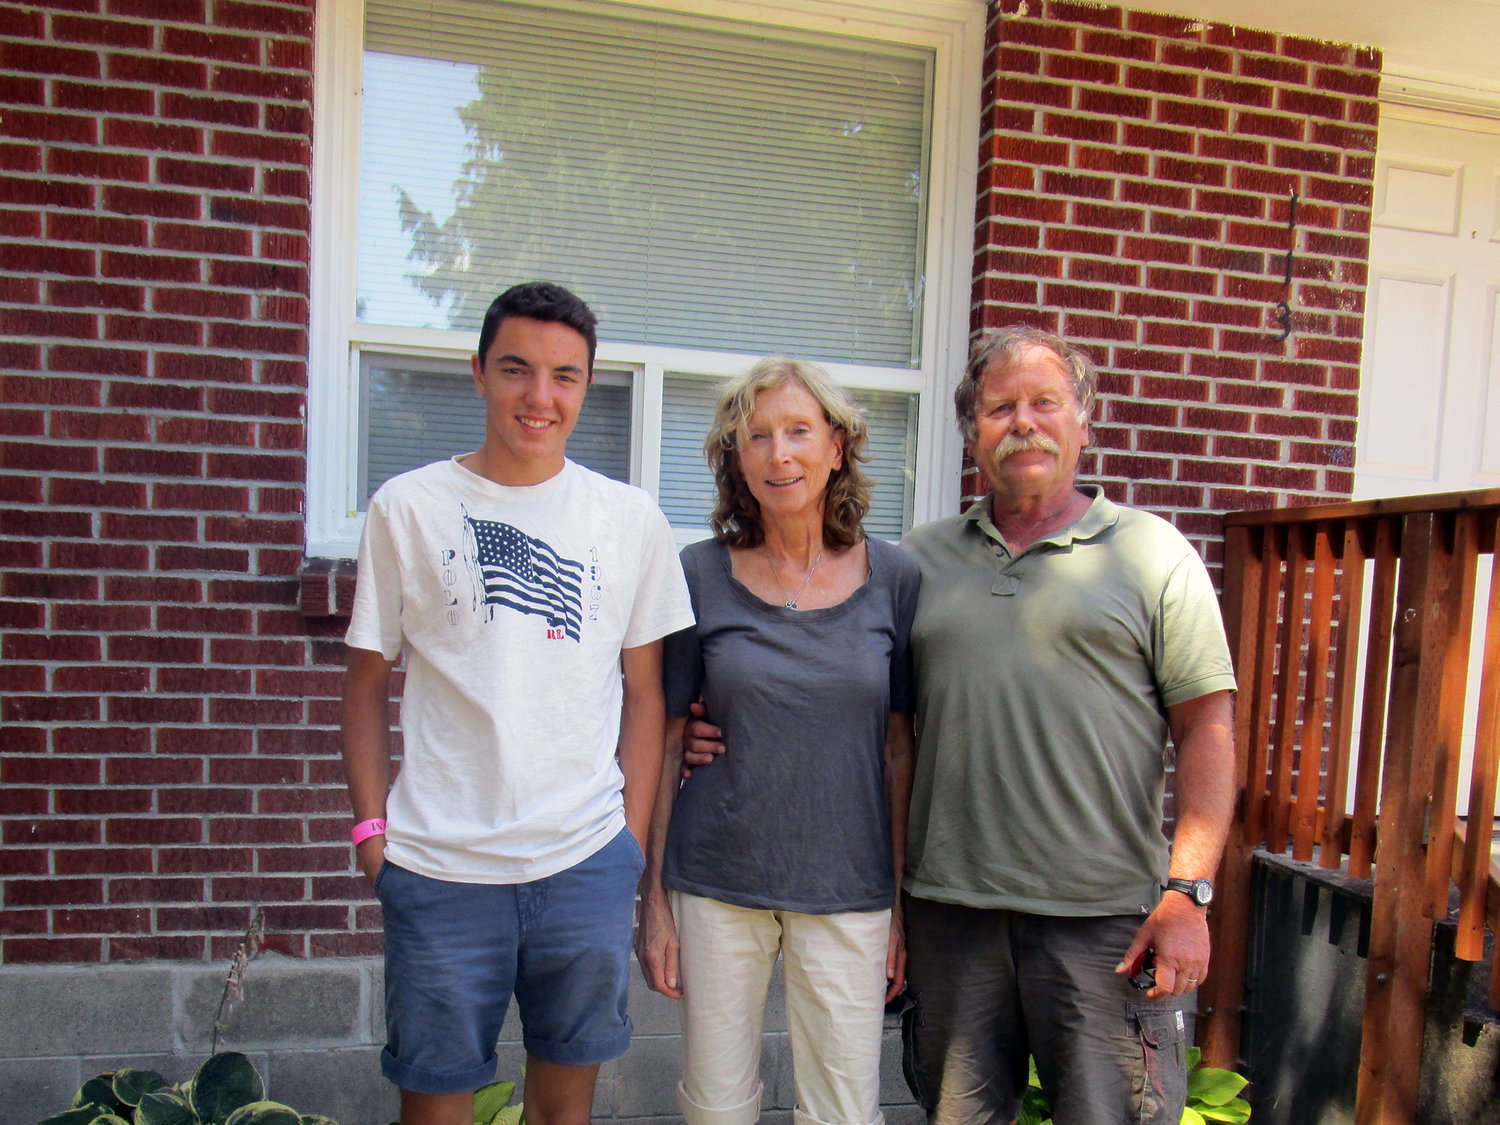 Antonio Romero, left, stands with Linda and Hank Claycamp in this 2015 Chronicle file photo. Claycamp mentored Romero.